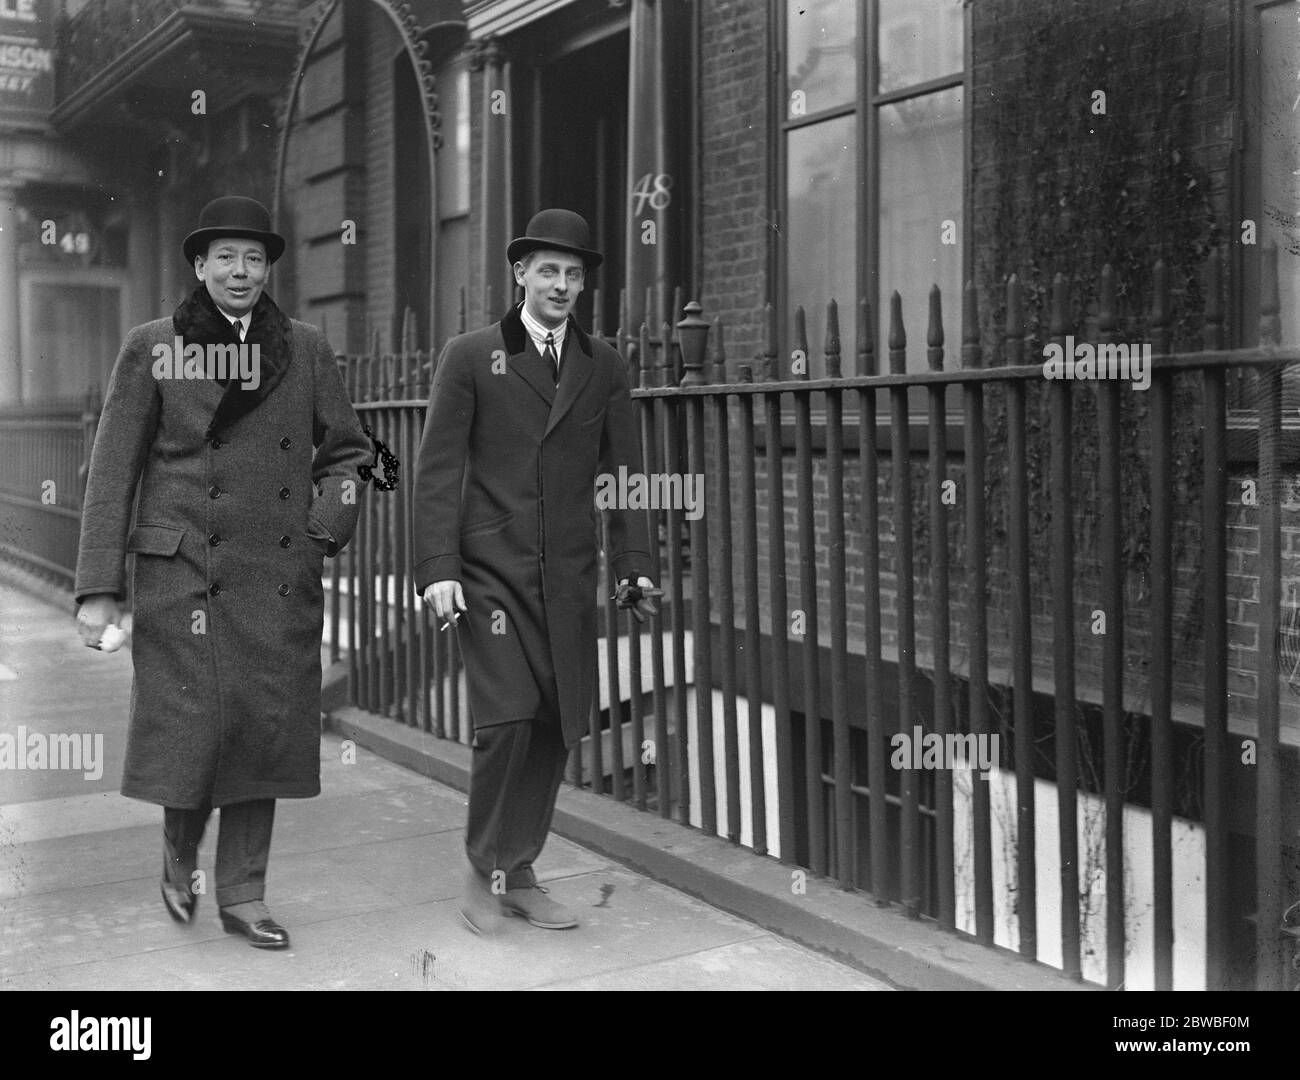 Midshipman Prince for British Navy . King of Romania ' s younger son in London Prince Nicholas of Romania ( right ) walking with H E Mons Nicolas Titulesco , the Romanian minister in London Prince Nicolas is the younger son of the King of Romania and is to enter the British Navy as a Mid Shipman 17 February 1923 Stock Photo